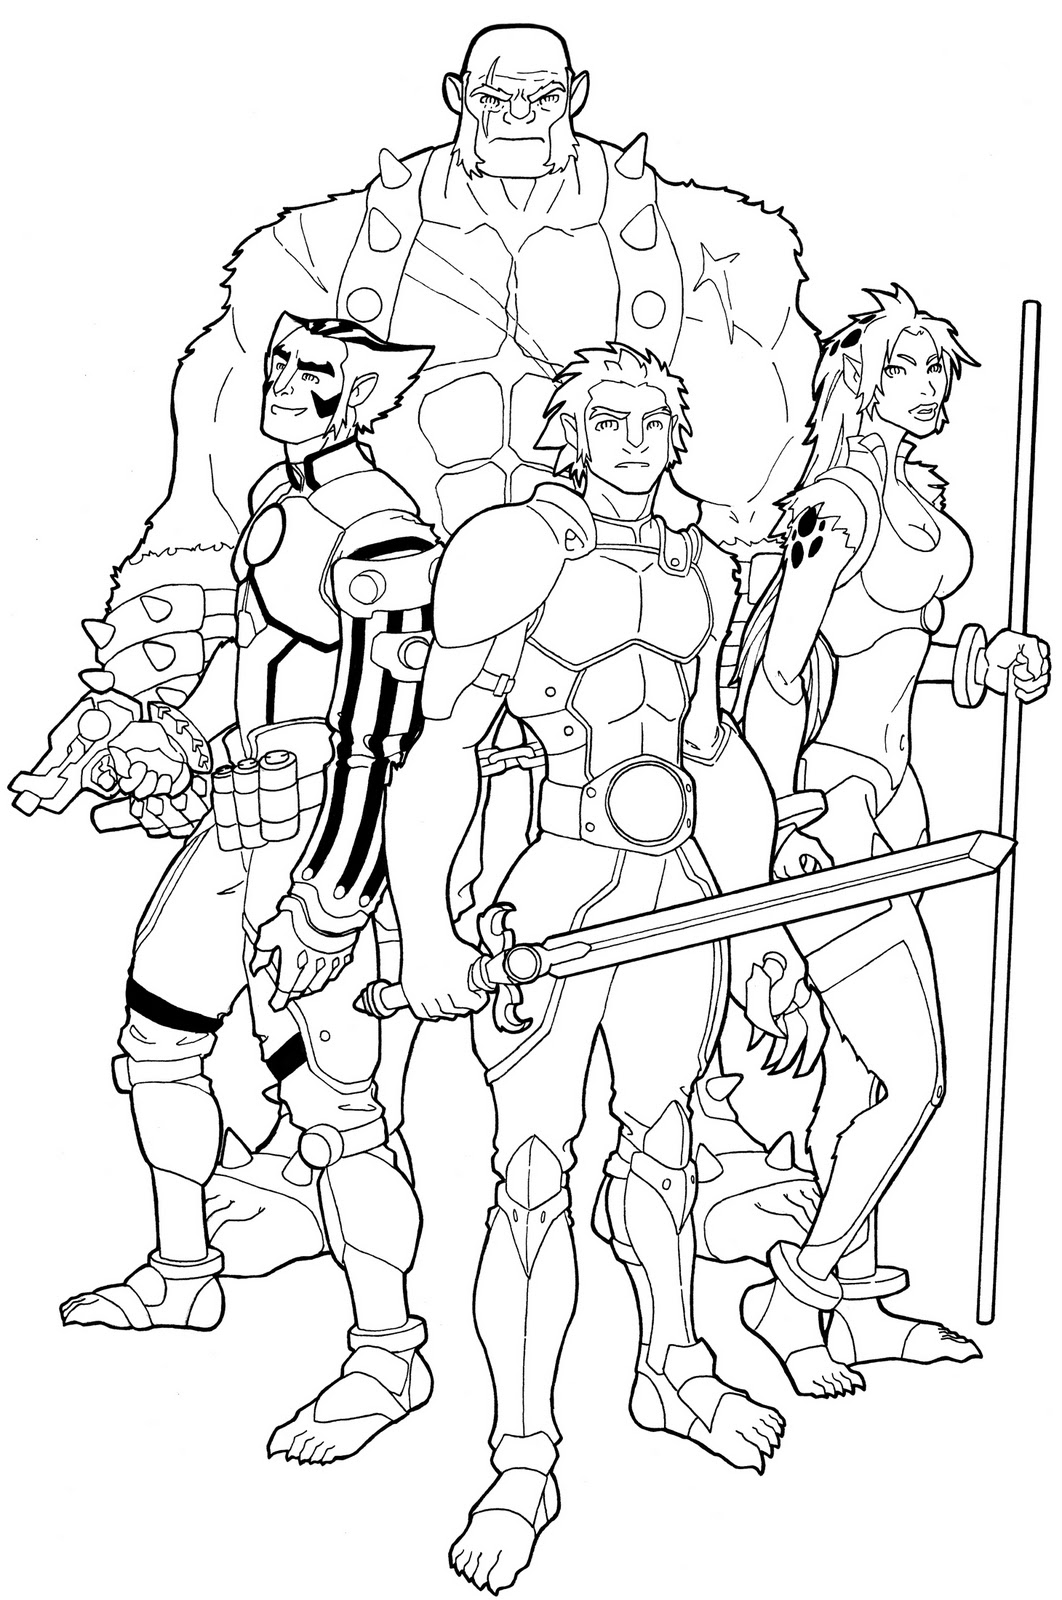 Printable Thundercats Coloring Pages Pdf - Printable Thundercats Coloring Pages